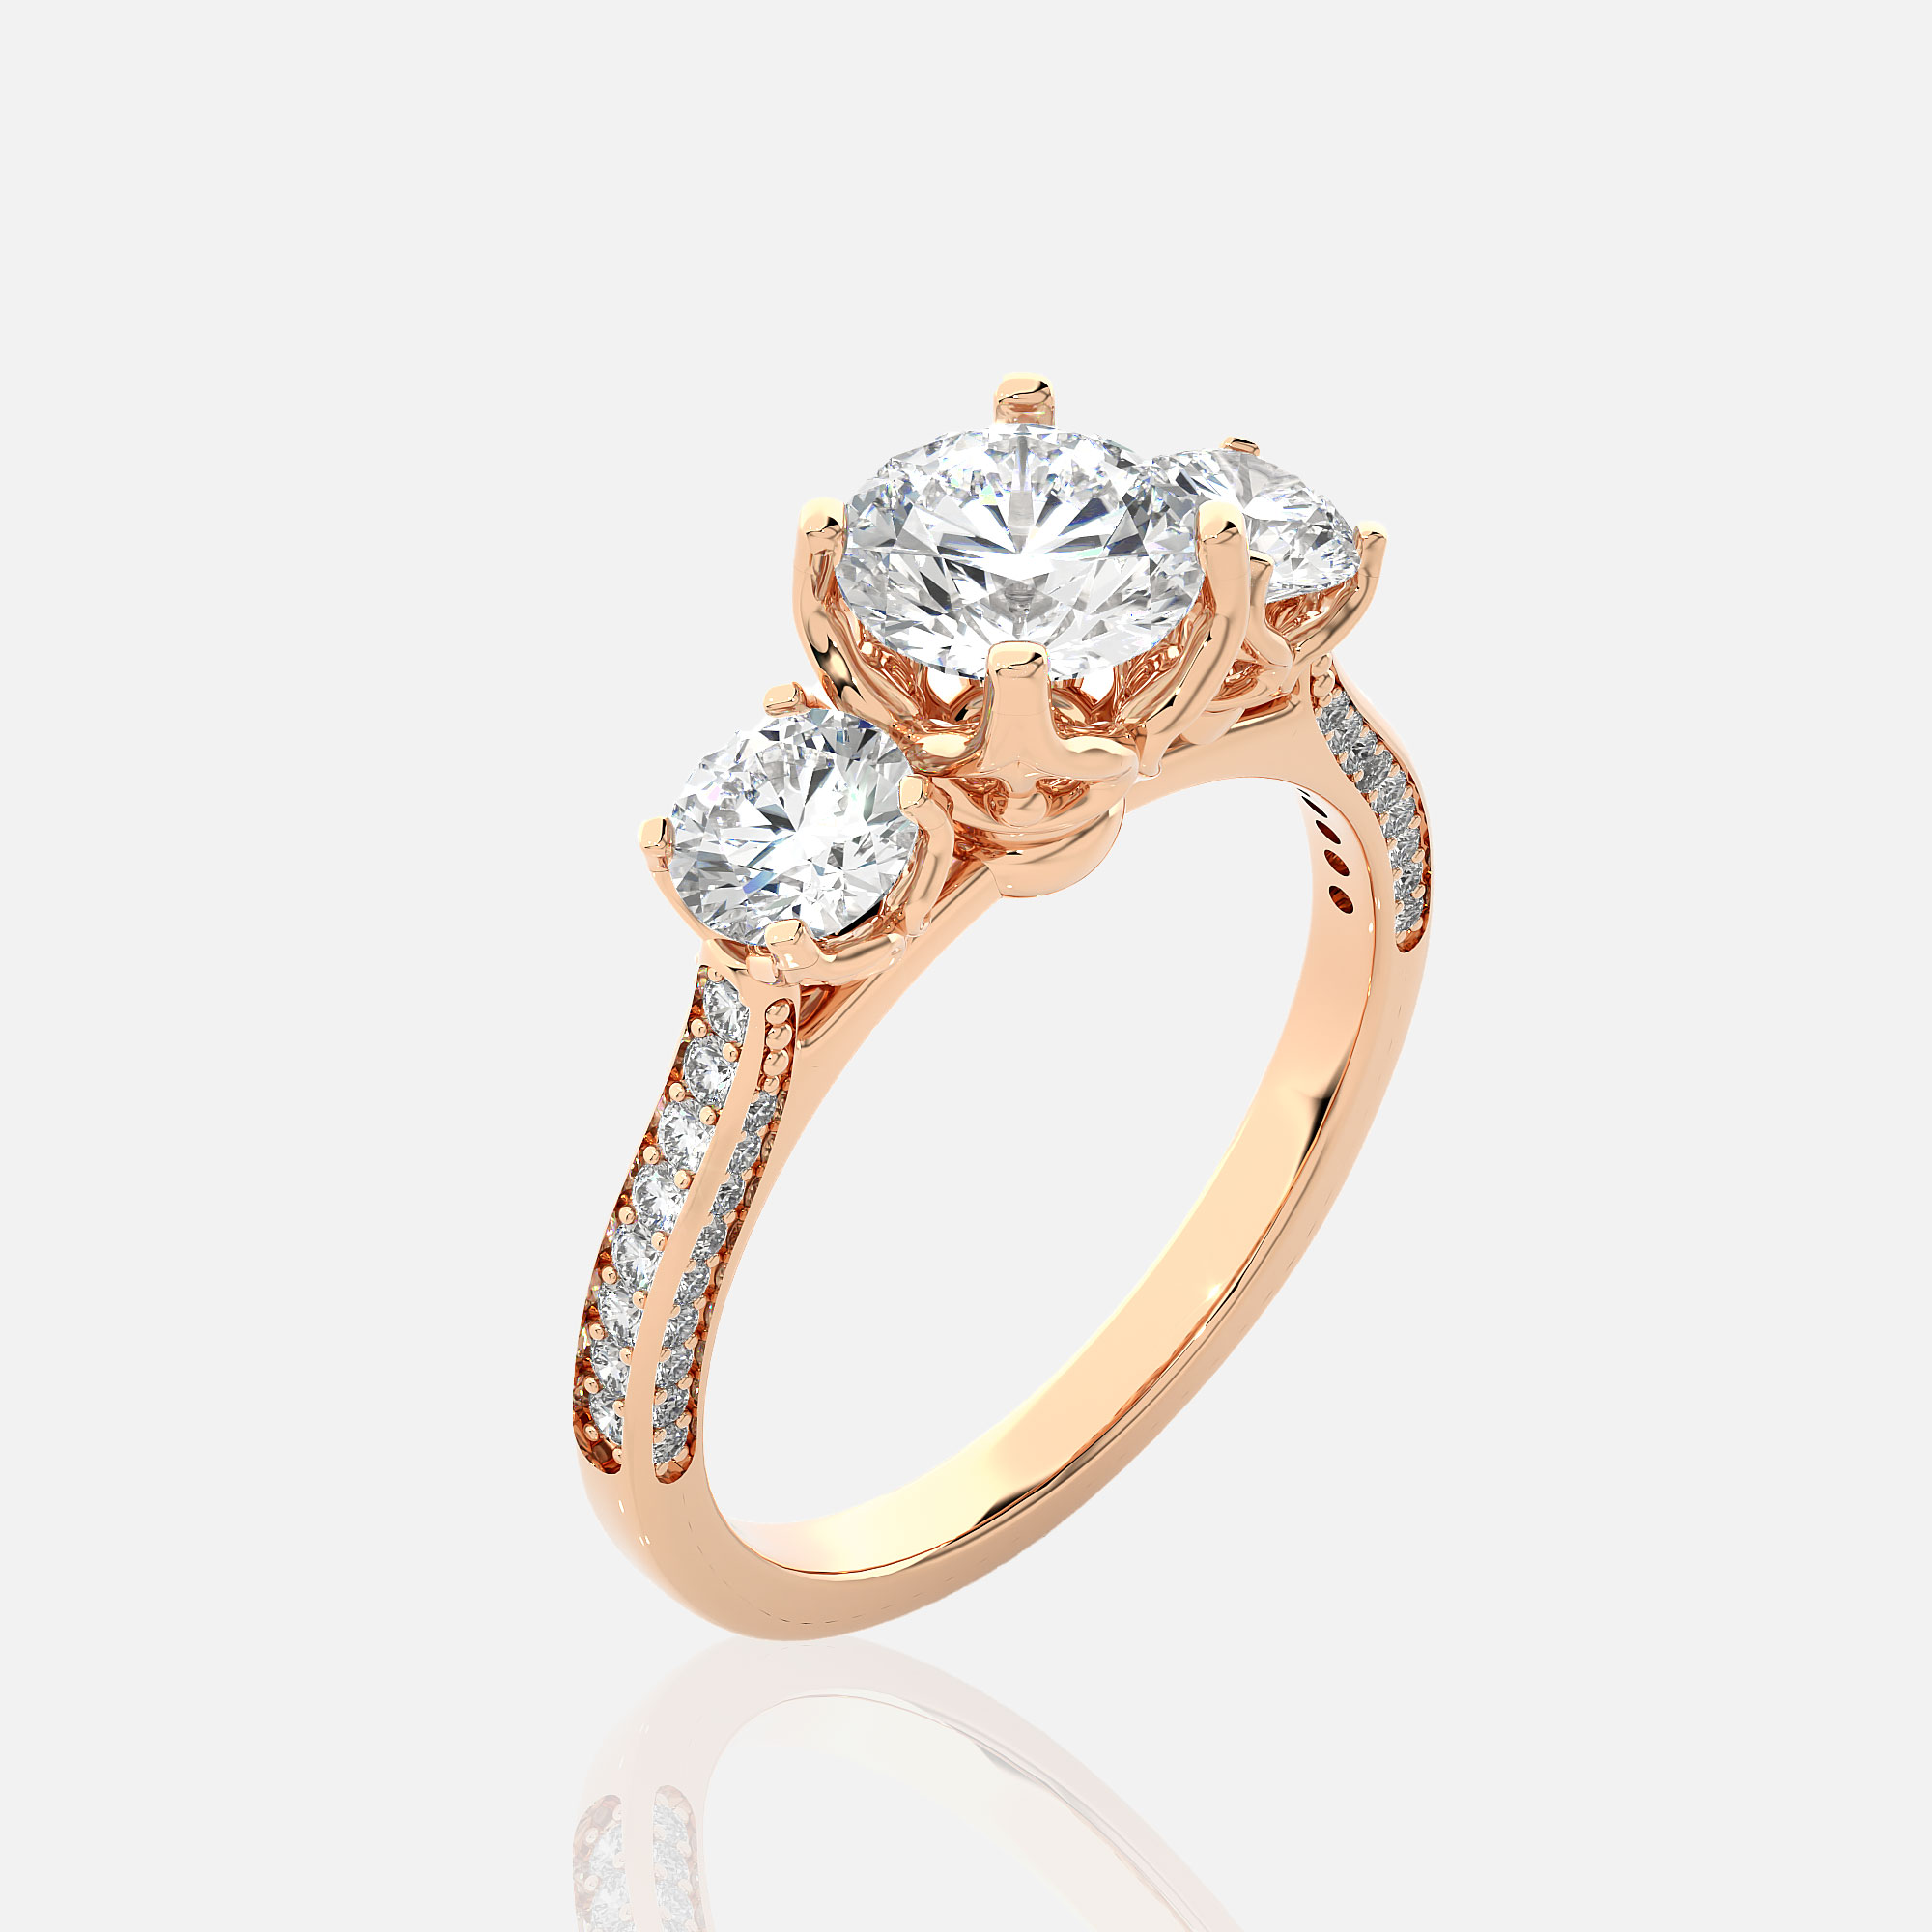 Buy quality Stackable Diamond Wedding Ring for Women by Royale Diamonds in  Pune